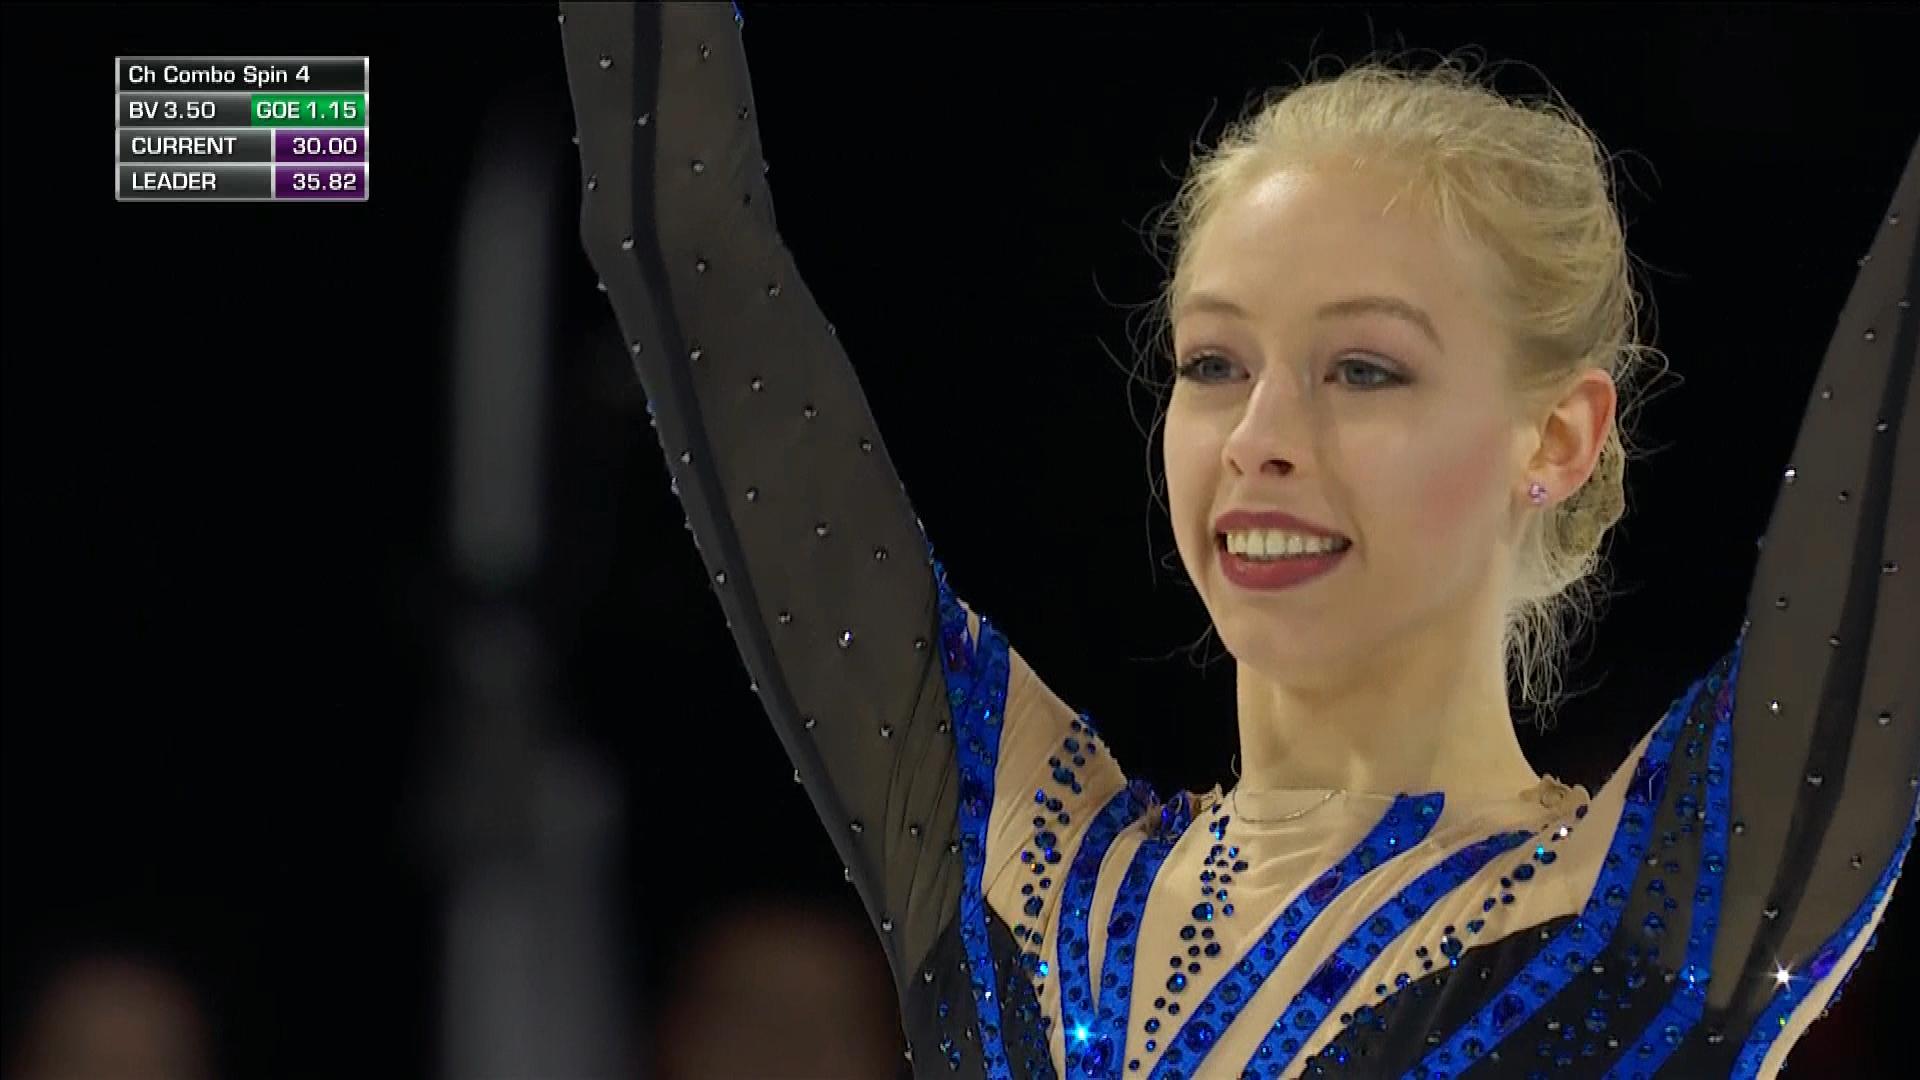 Bradie Tennell In Fifth After Skate America Short Program Nbc Sports